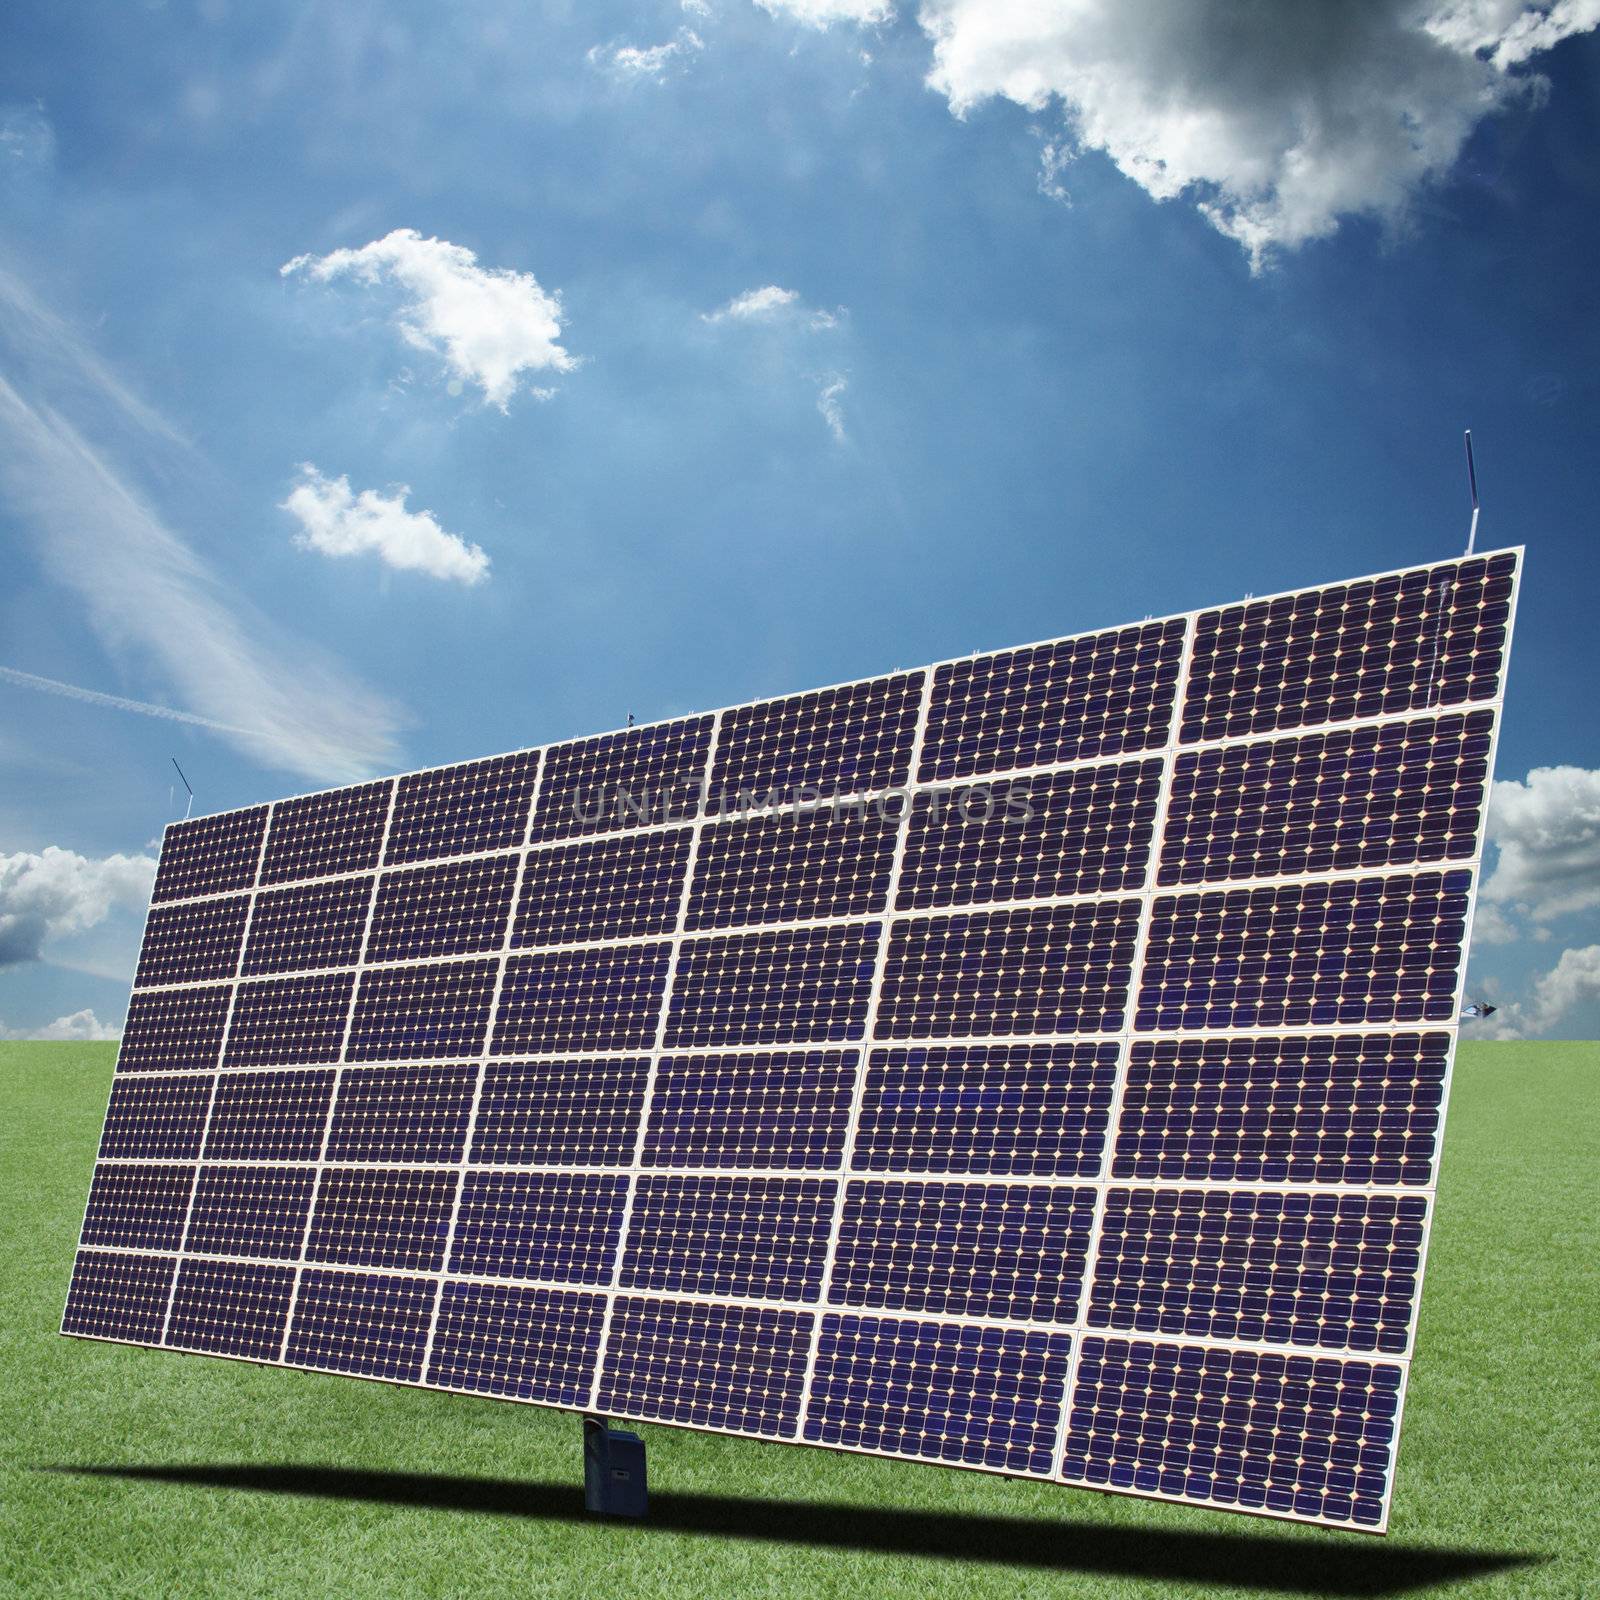 Solar panels generate electricity on a sunny day